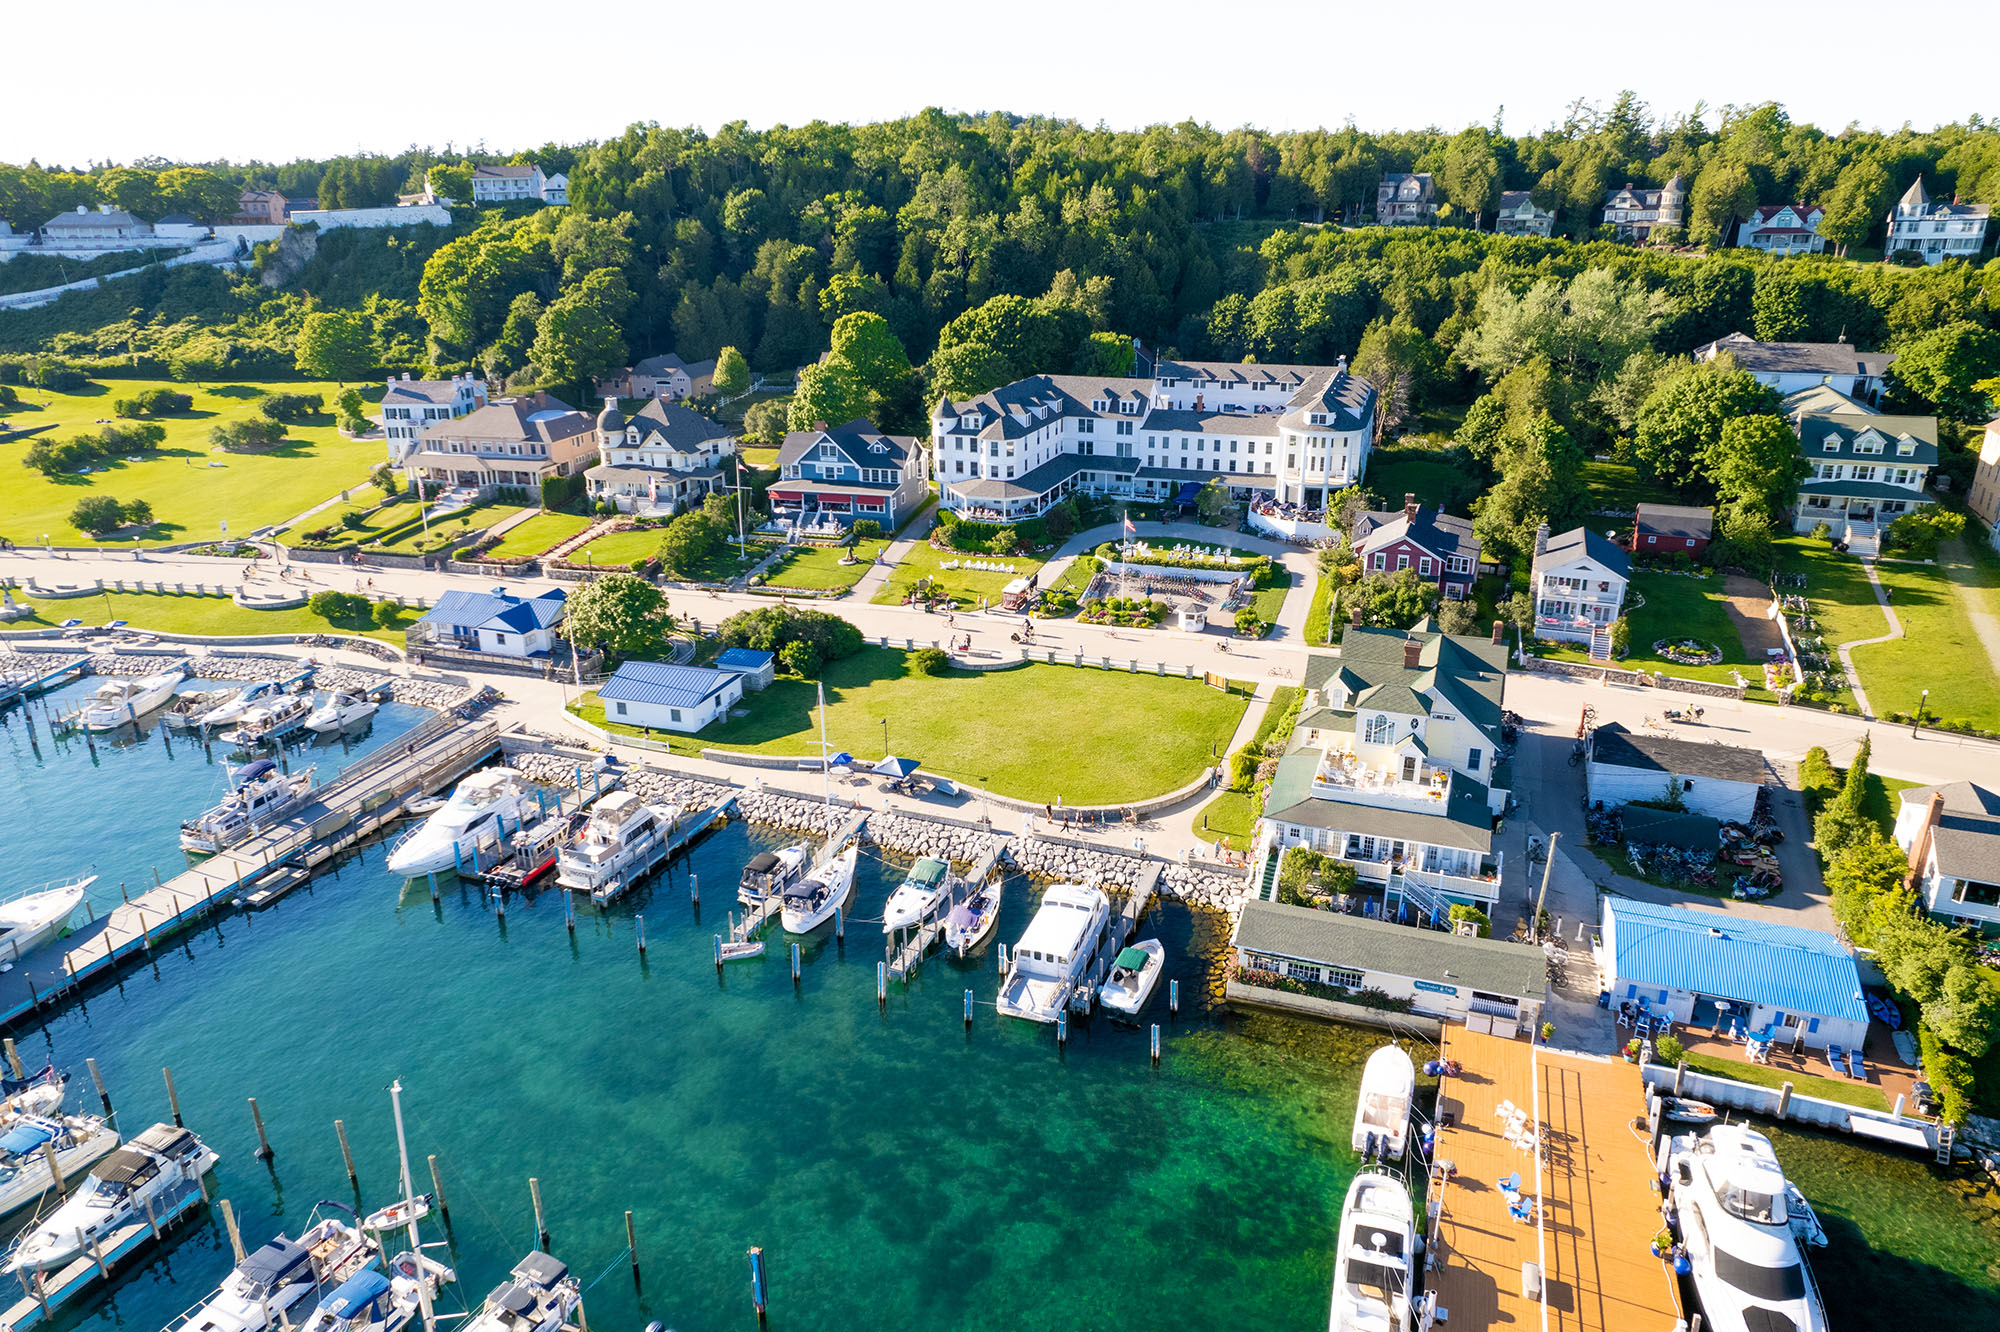 Where to stay on Mackinac Island - Featuring the Island House Hotel